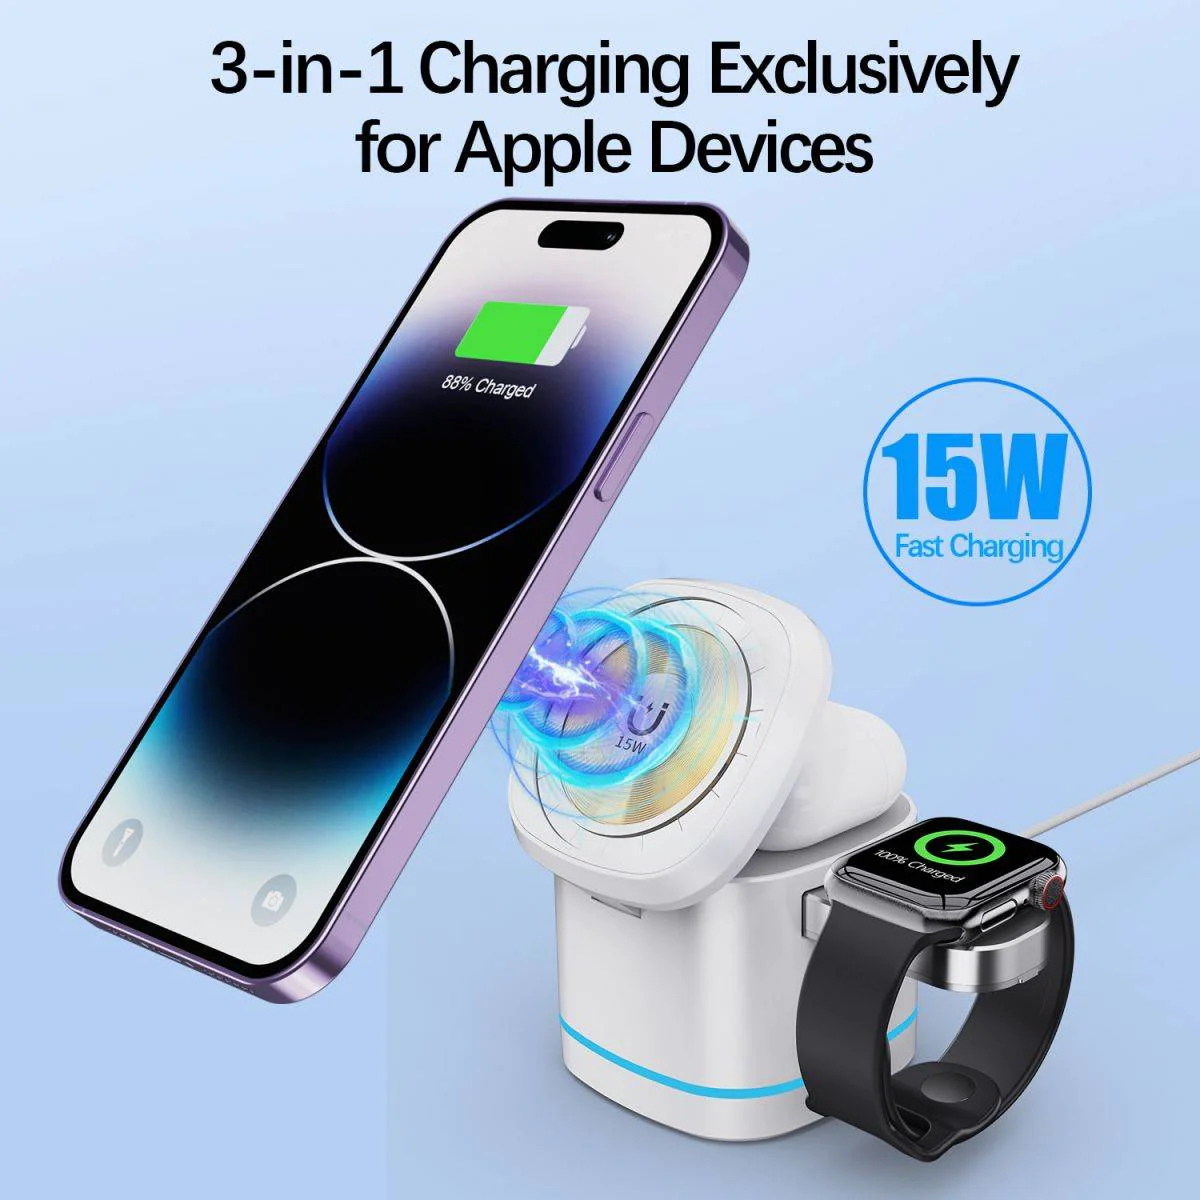 3 in 1 Magnetic Wireless Charger - Fast Charge 15W